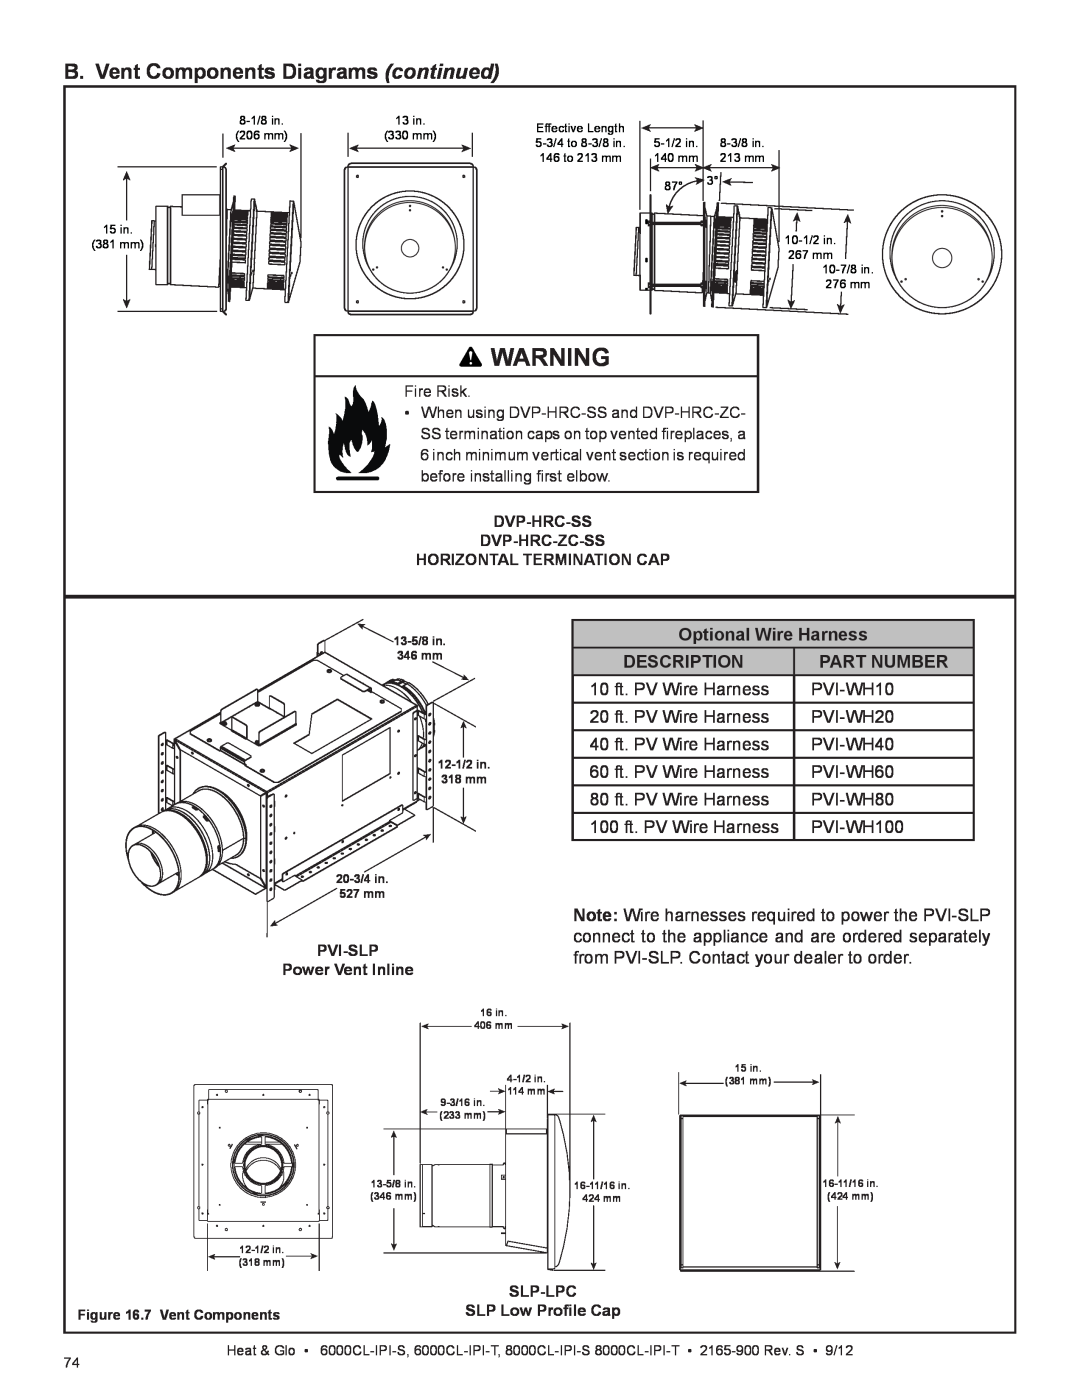 Heat & Glo LifeStyle 6000CL-IPI-S B. Vent Components Diagrams continued, Optional Wire Harness, Description, Part Number 